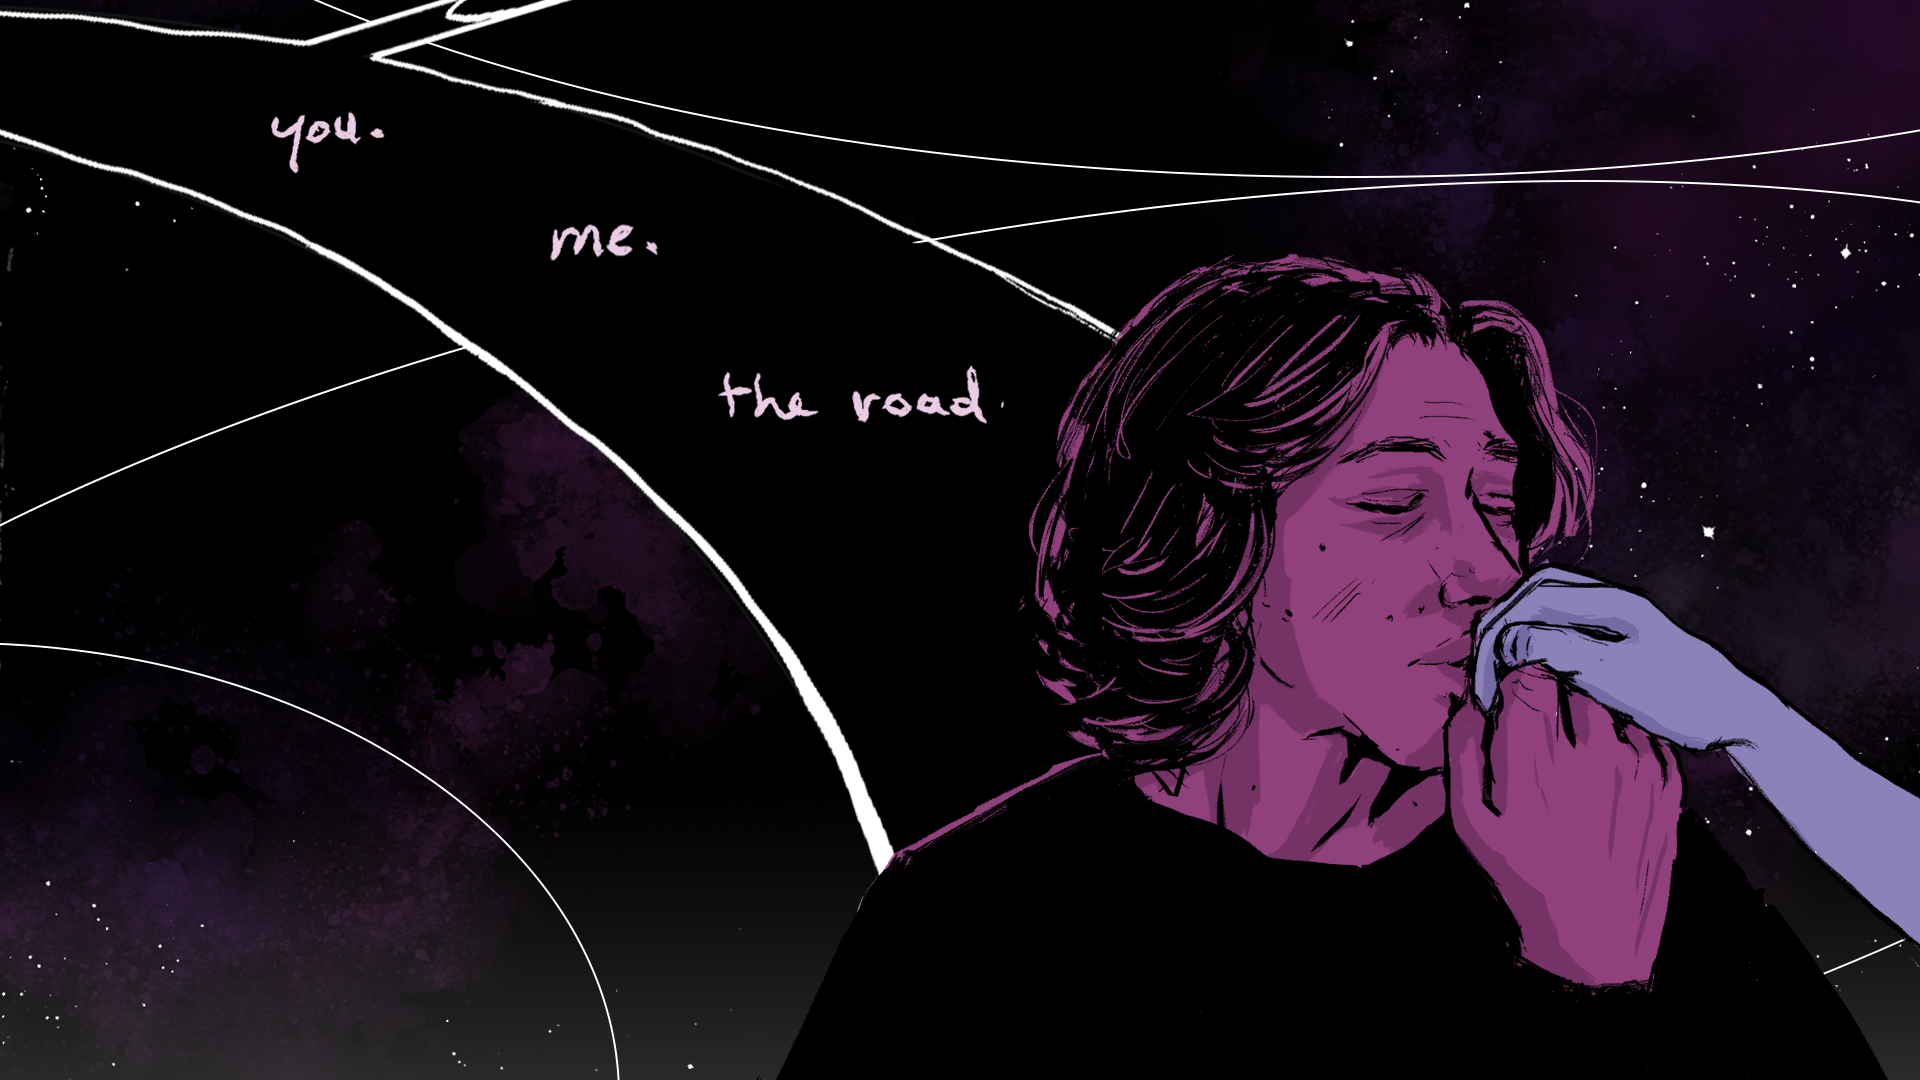 "You. Me. The road." Ben presses his lips to Rey's knuckles. Behind them, the World Between Worlds spans the stars.